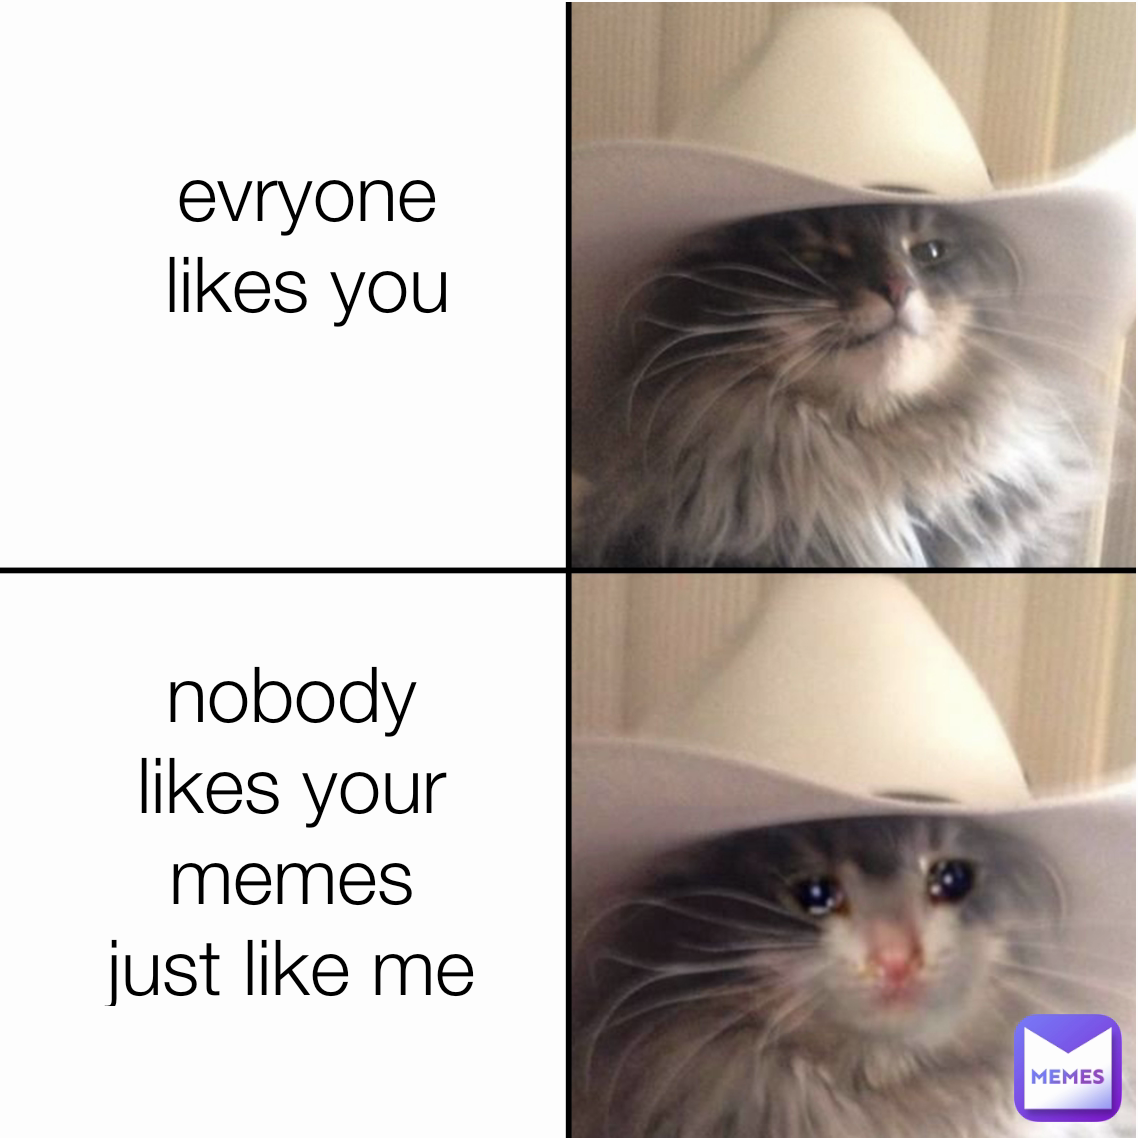 evryone likes you nobody likes your memes just like me